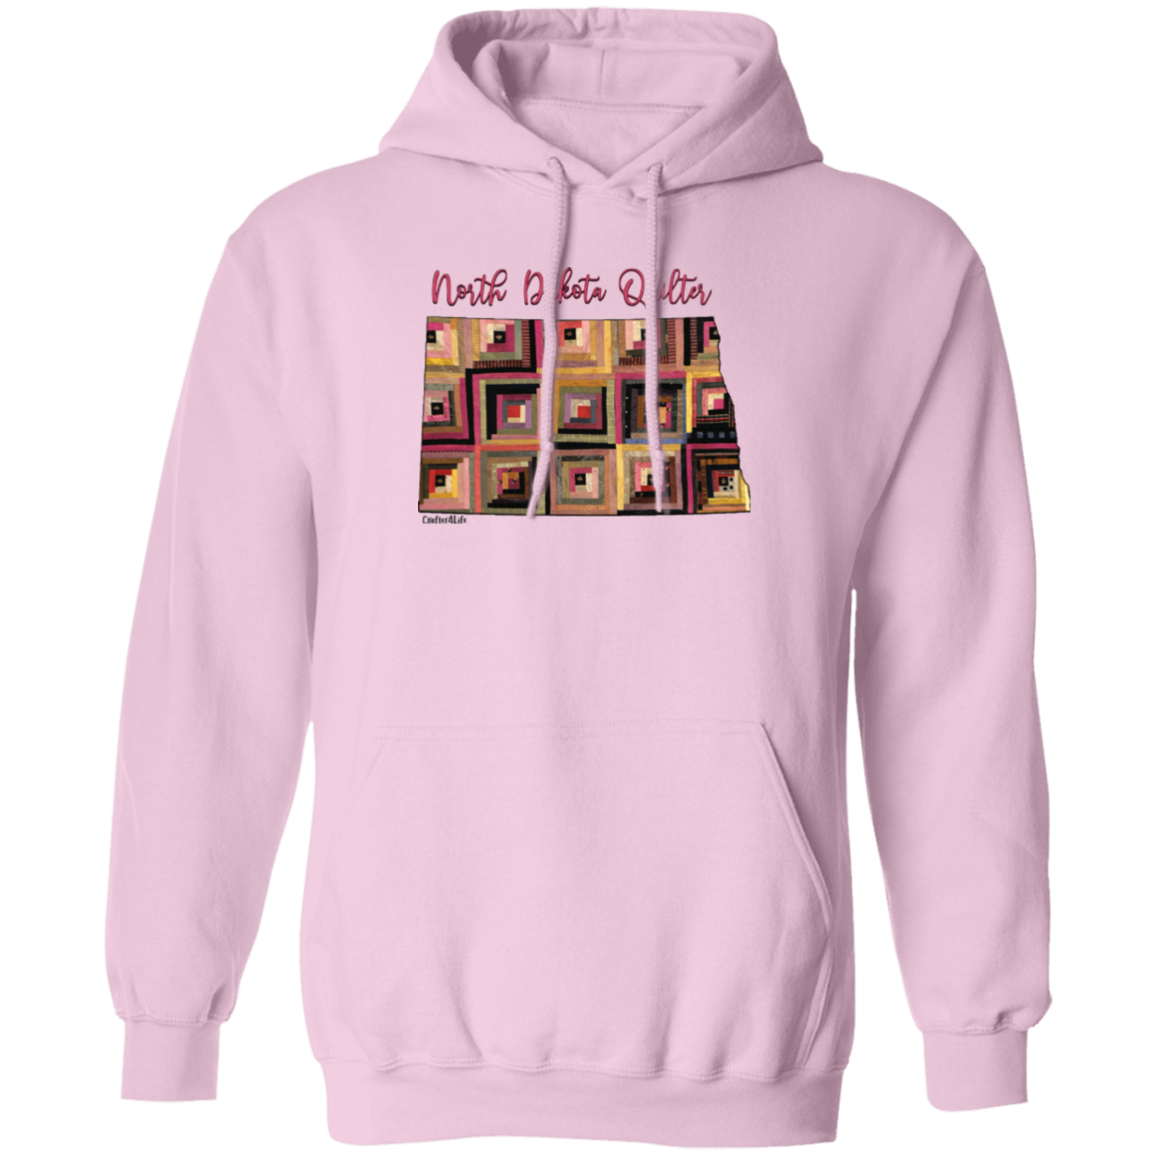 North Dakota Quilter Pullover Hoodie, Gift for Quilting Friends and Family